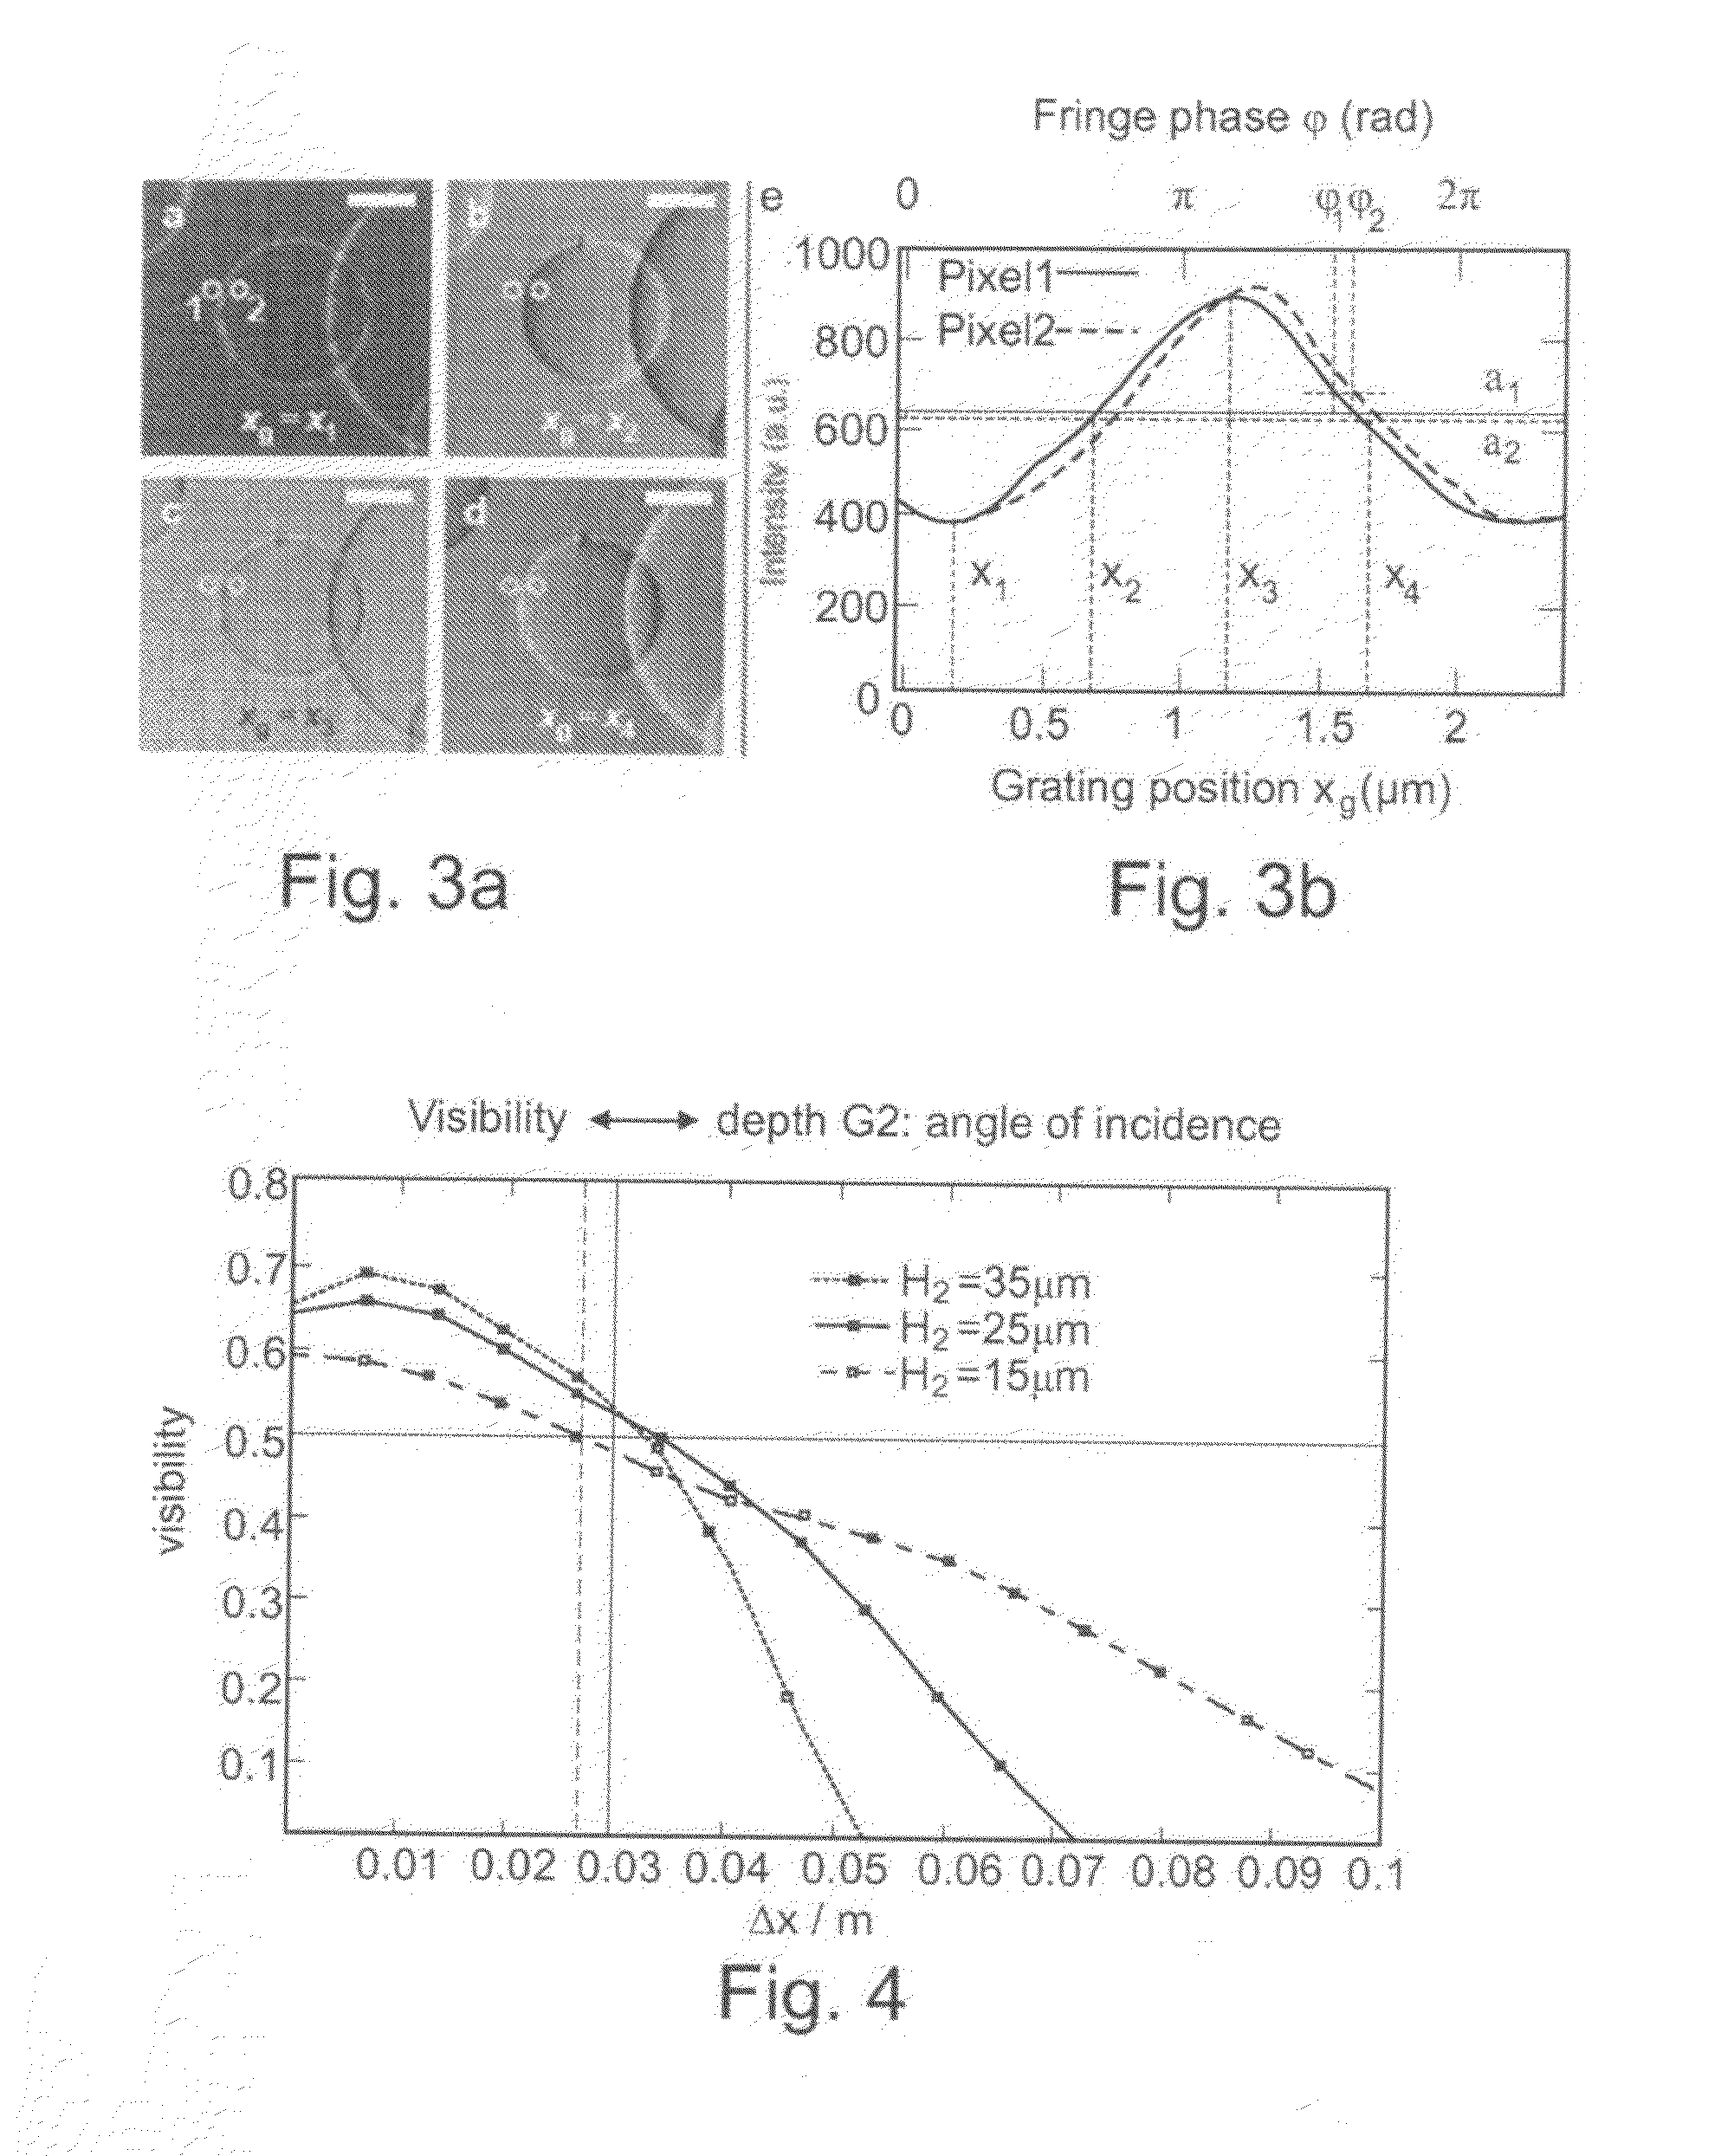 Apparatus for phase-contrast imaging comprising a displaceable X-ray detector element and method